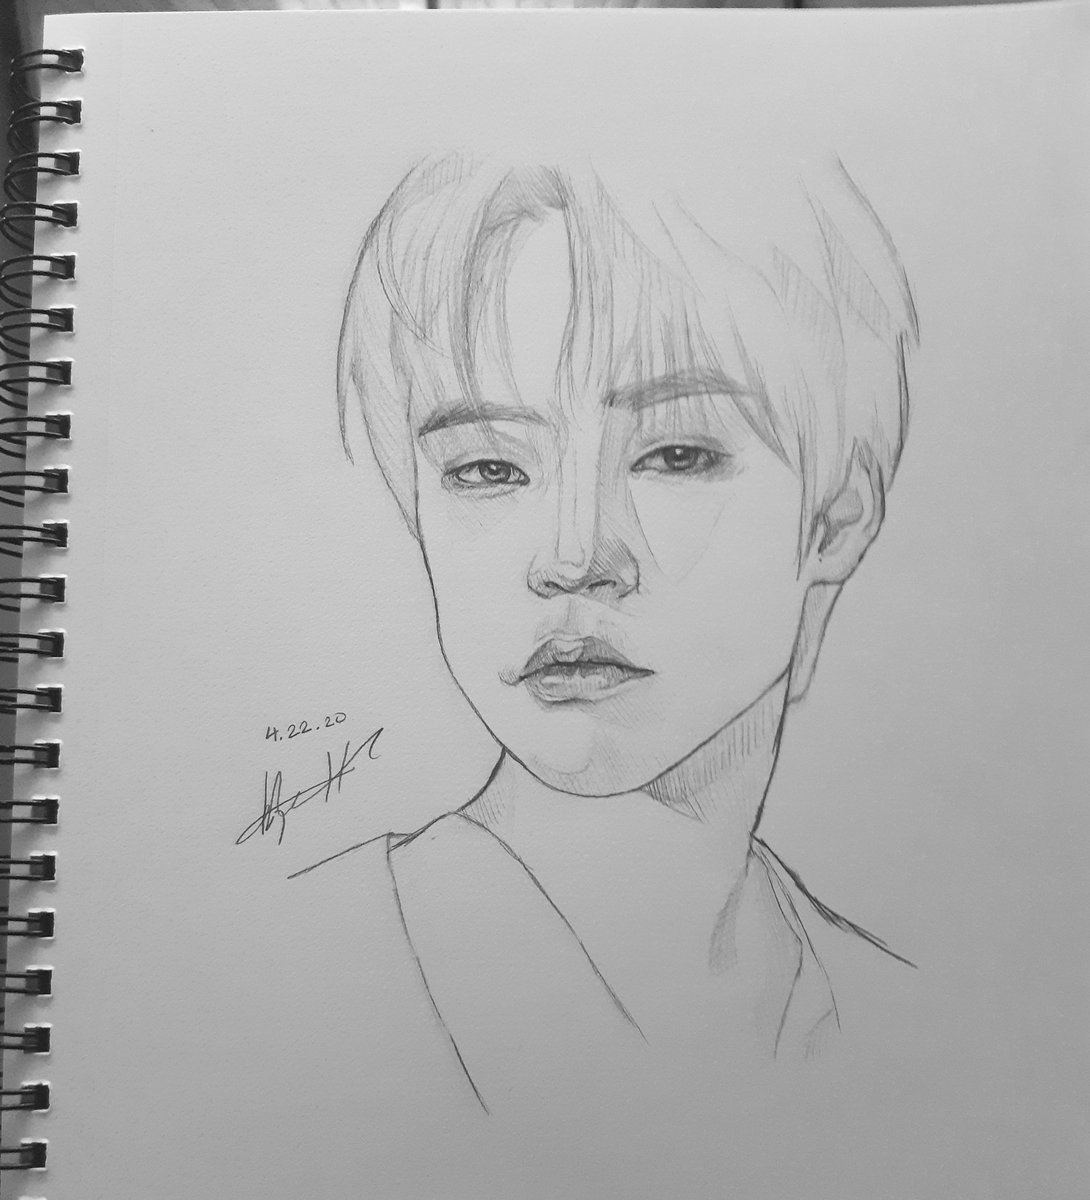  #sixfanarts day 2 !!I did a quick sketch of chenle today !! #nct  #nctdream  #NCTDREAM_Ridin  #NCTDREAM_Reload  #NCTDREAM_PuzzlePiece  #CHENLE  #nctdreamfanart